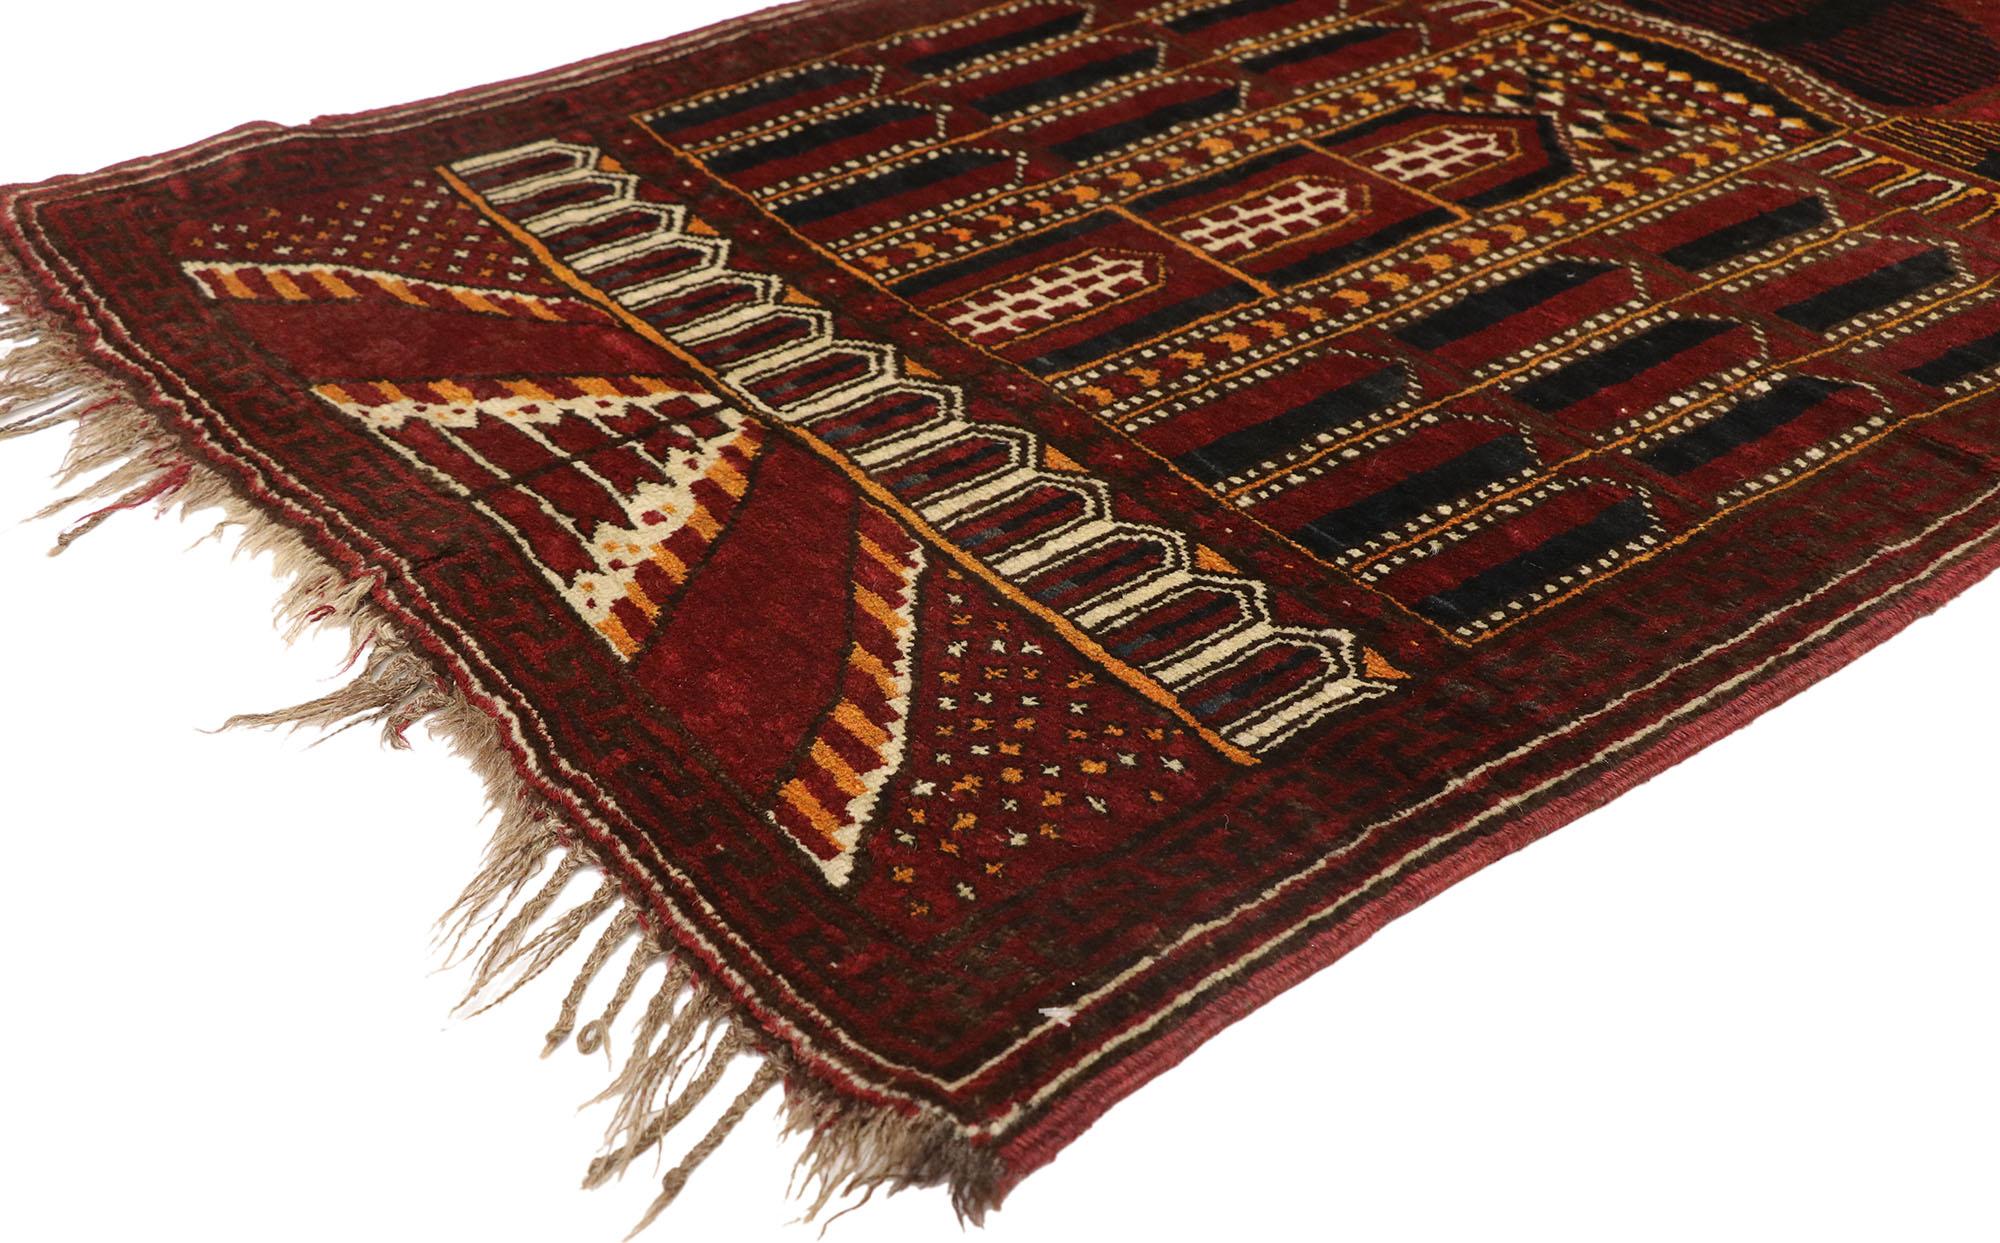 71986 antique Afghan Kizil Ayak Mosque Prayer rug. Warm and inviting with a dark, rich color palette, this antique Afghan Kizil Ayak Mosque prayer rug beautifully displays a two compartment design. The majority of the top showcases a mosque while